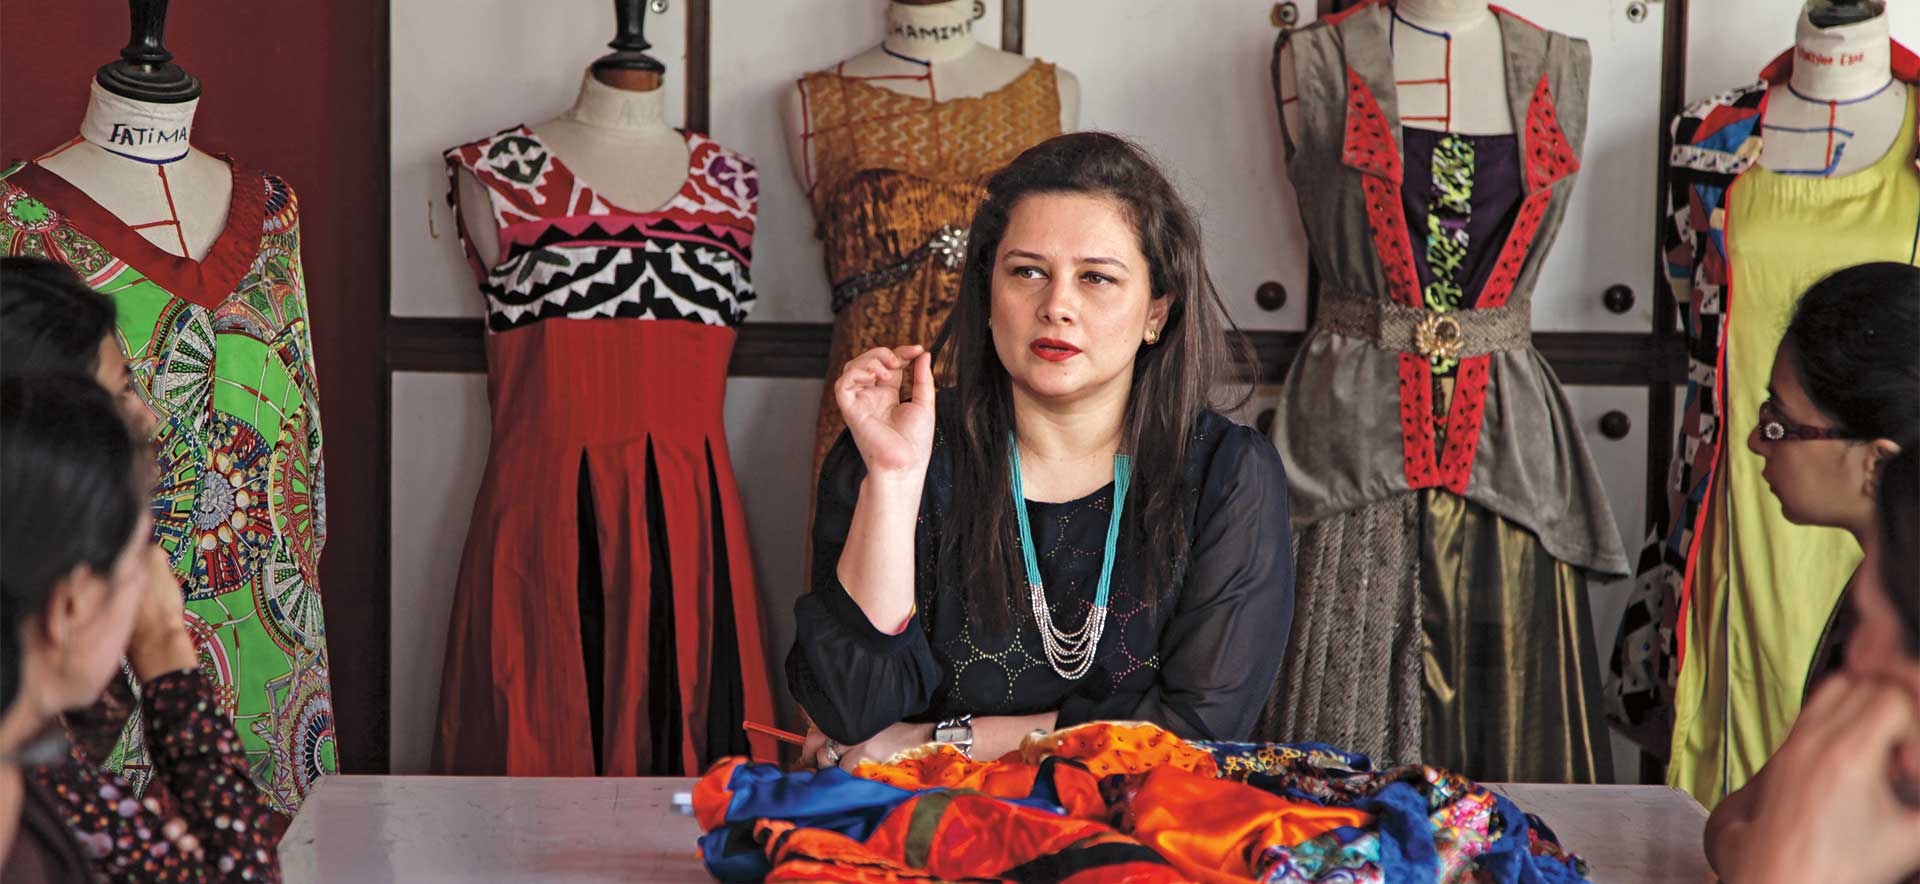 Ambreen Khan sits among clothing designs in a meeting